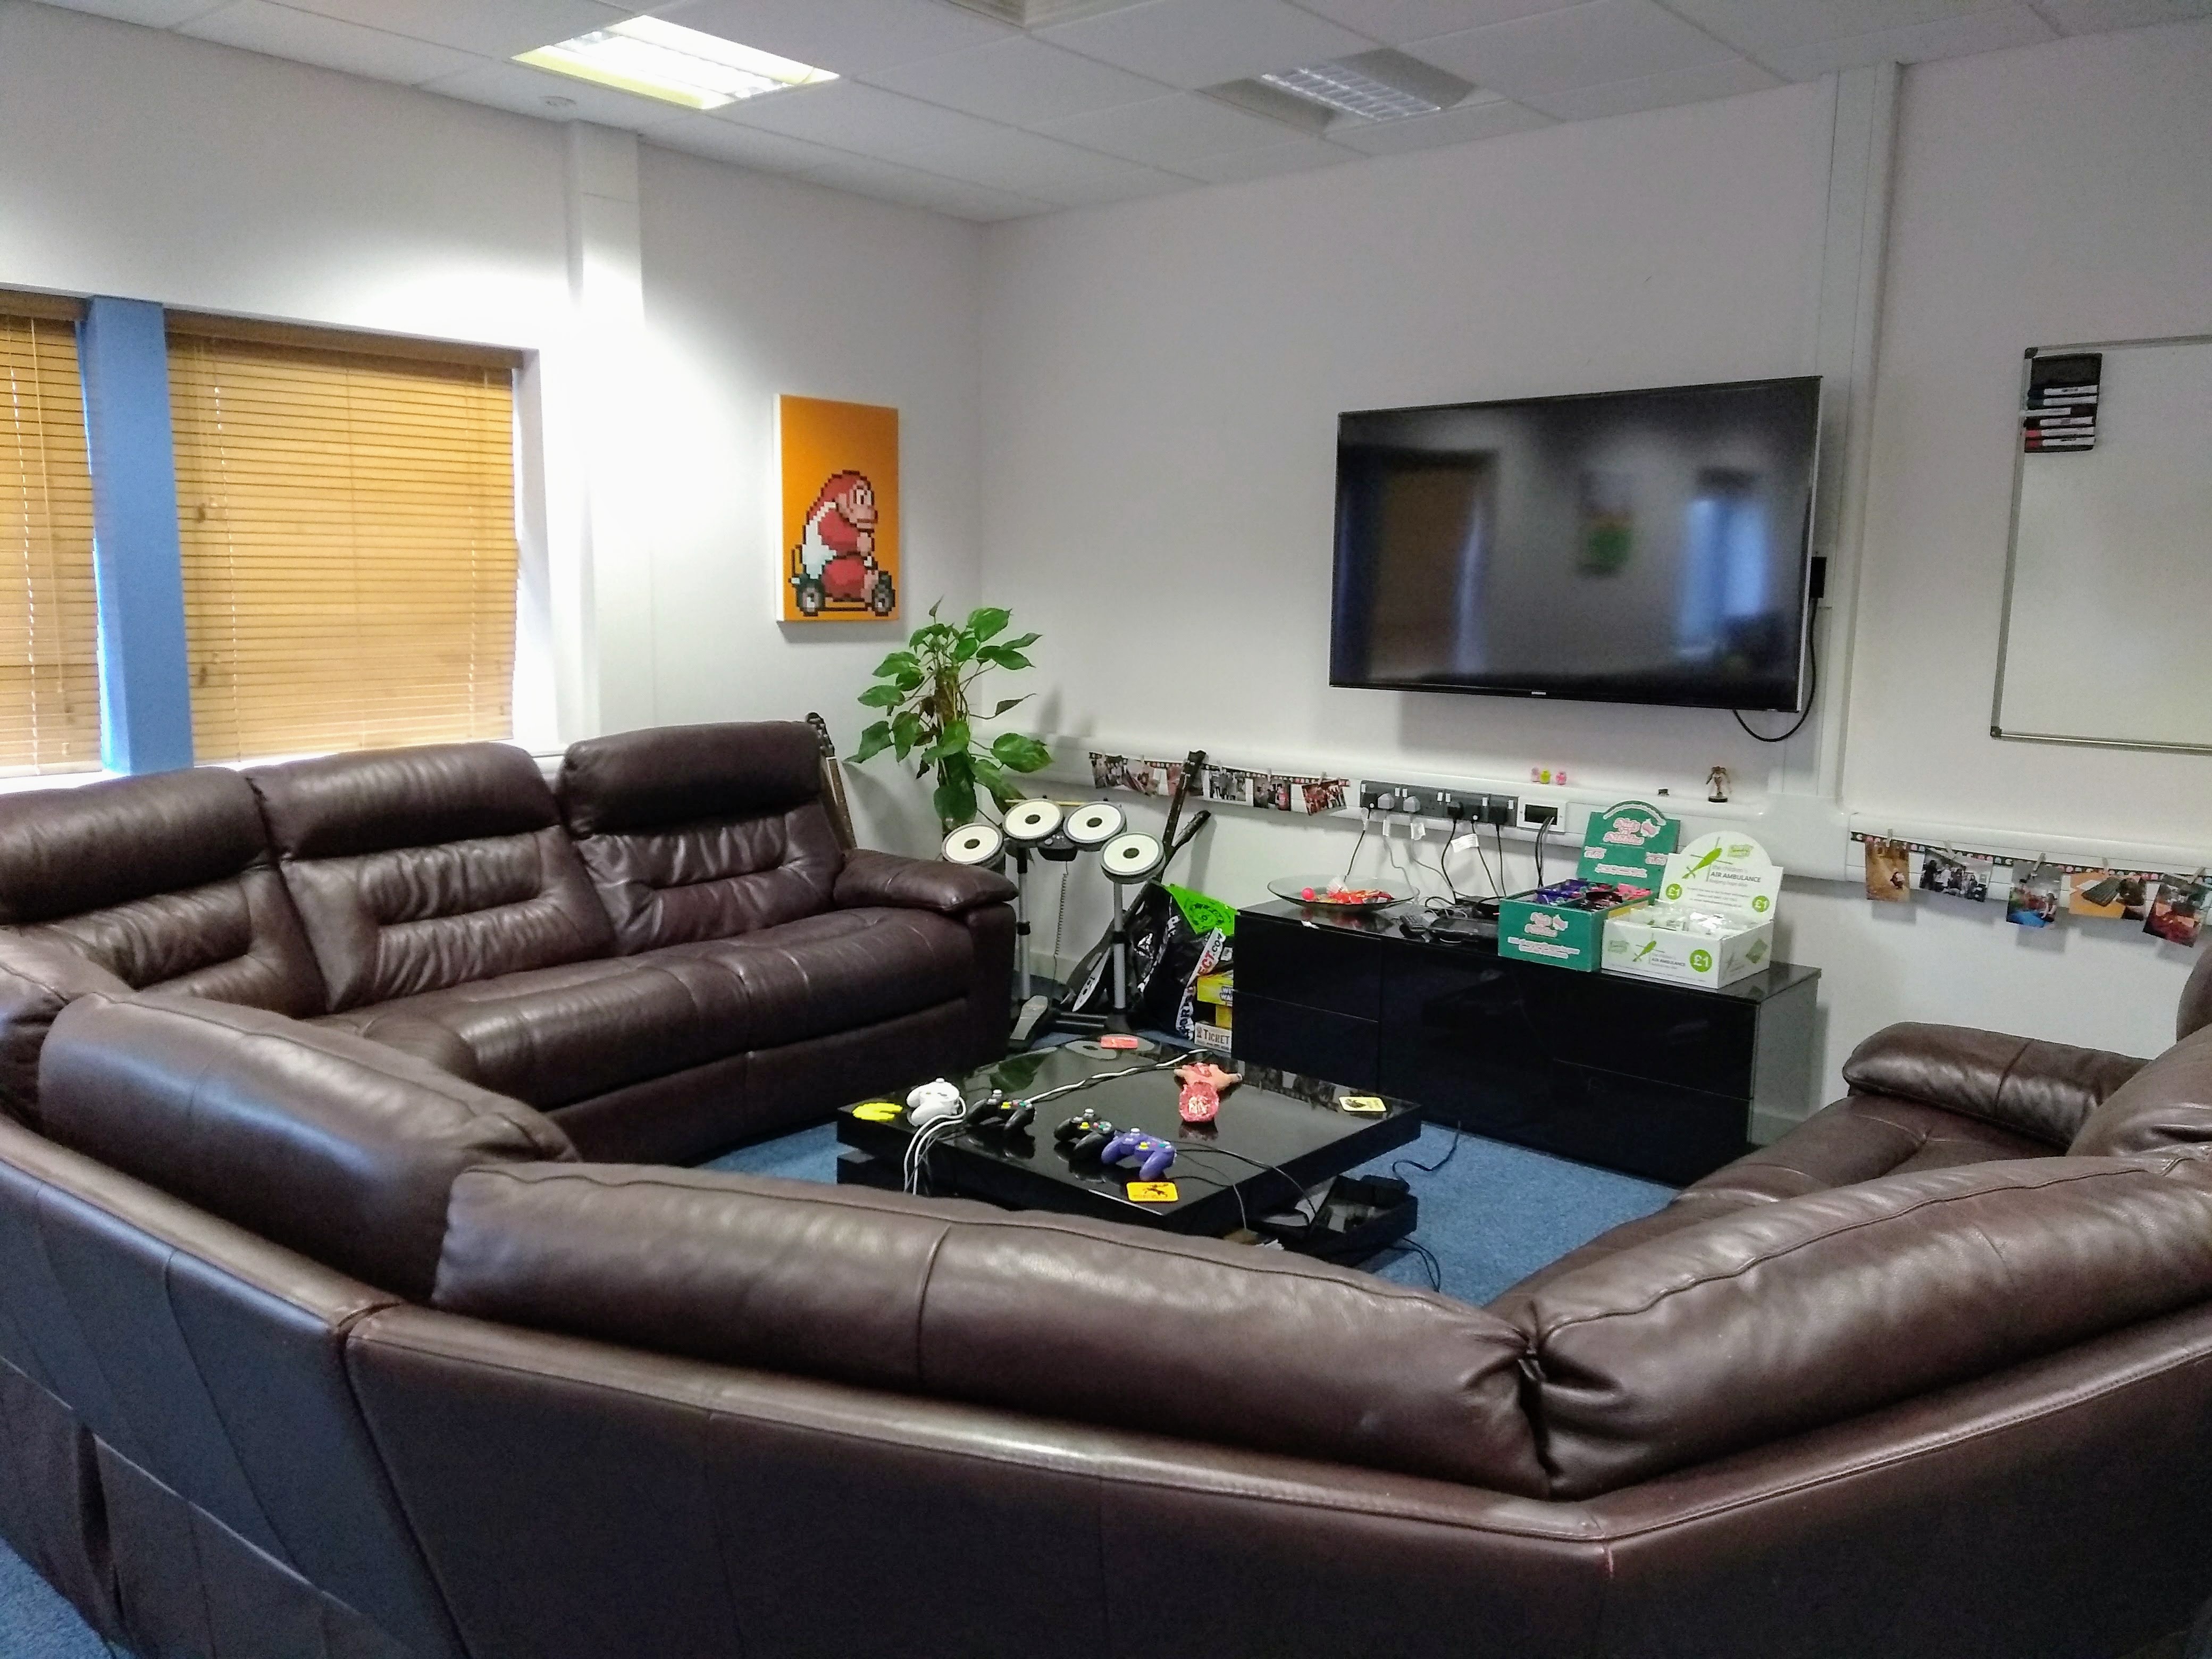 Here's where we enjoy our social nights, as well as some lunchtime Super Smash Bros.